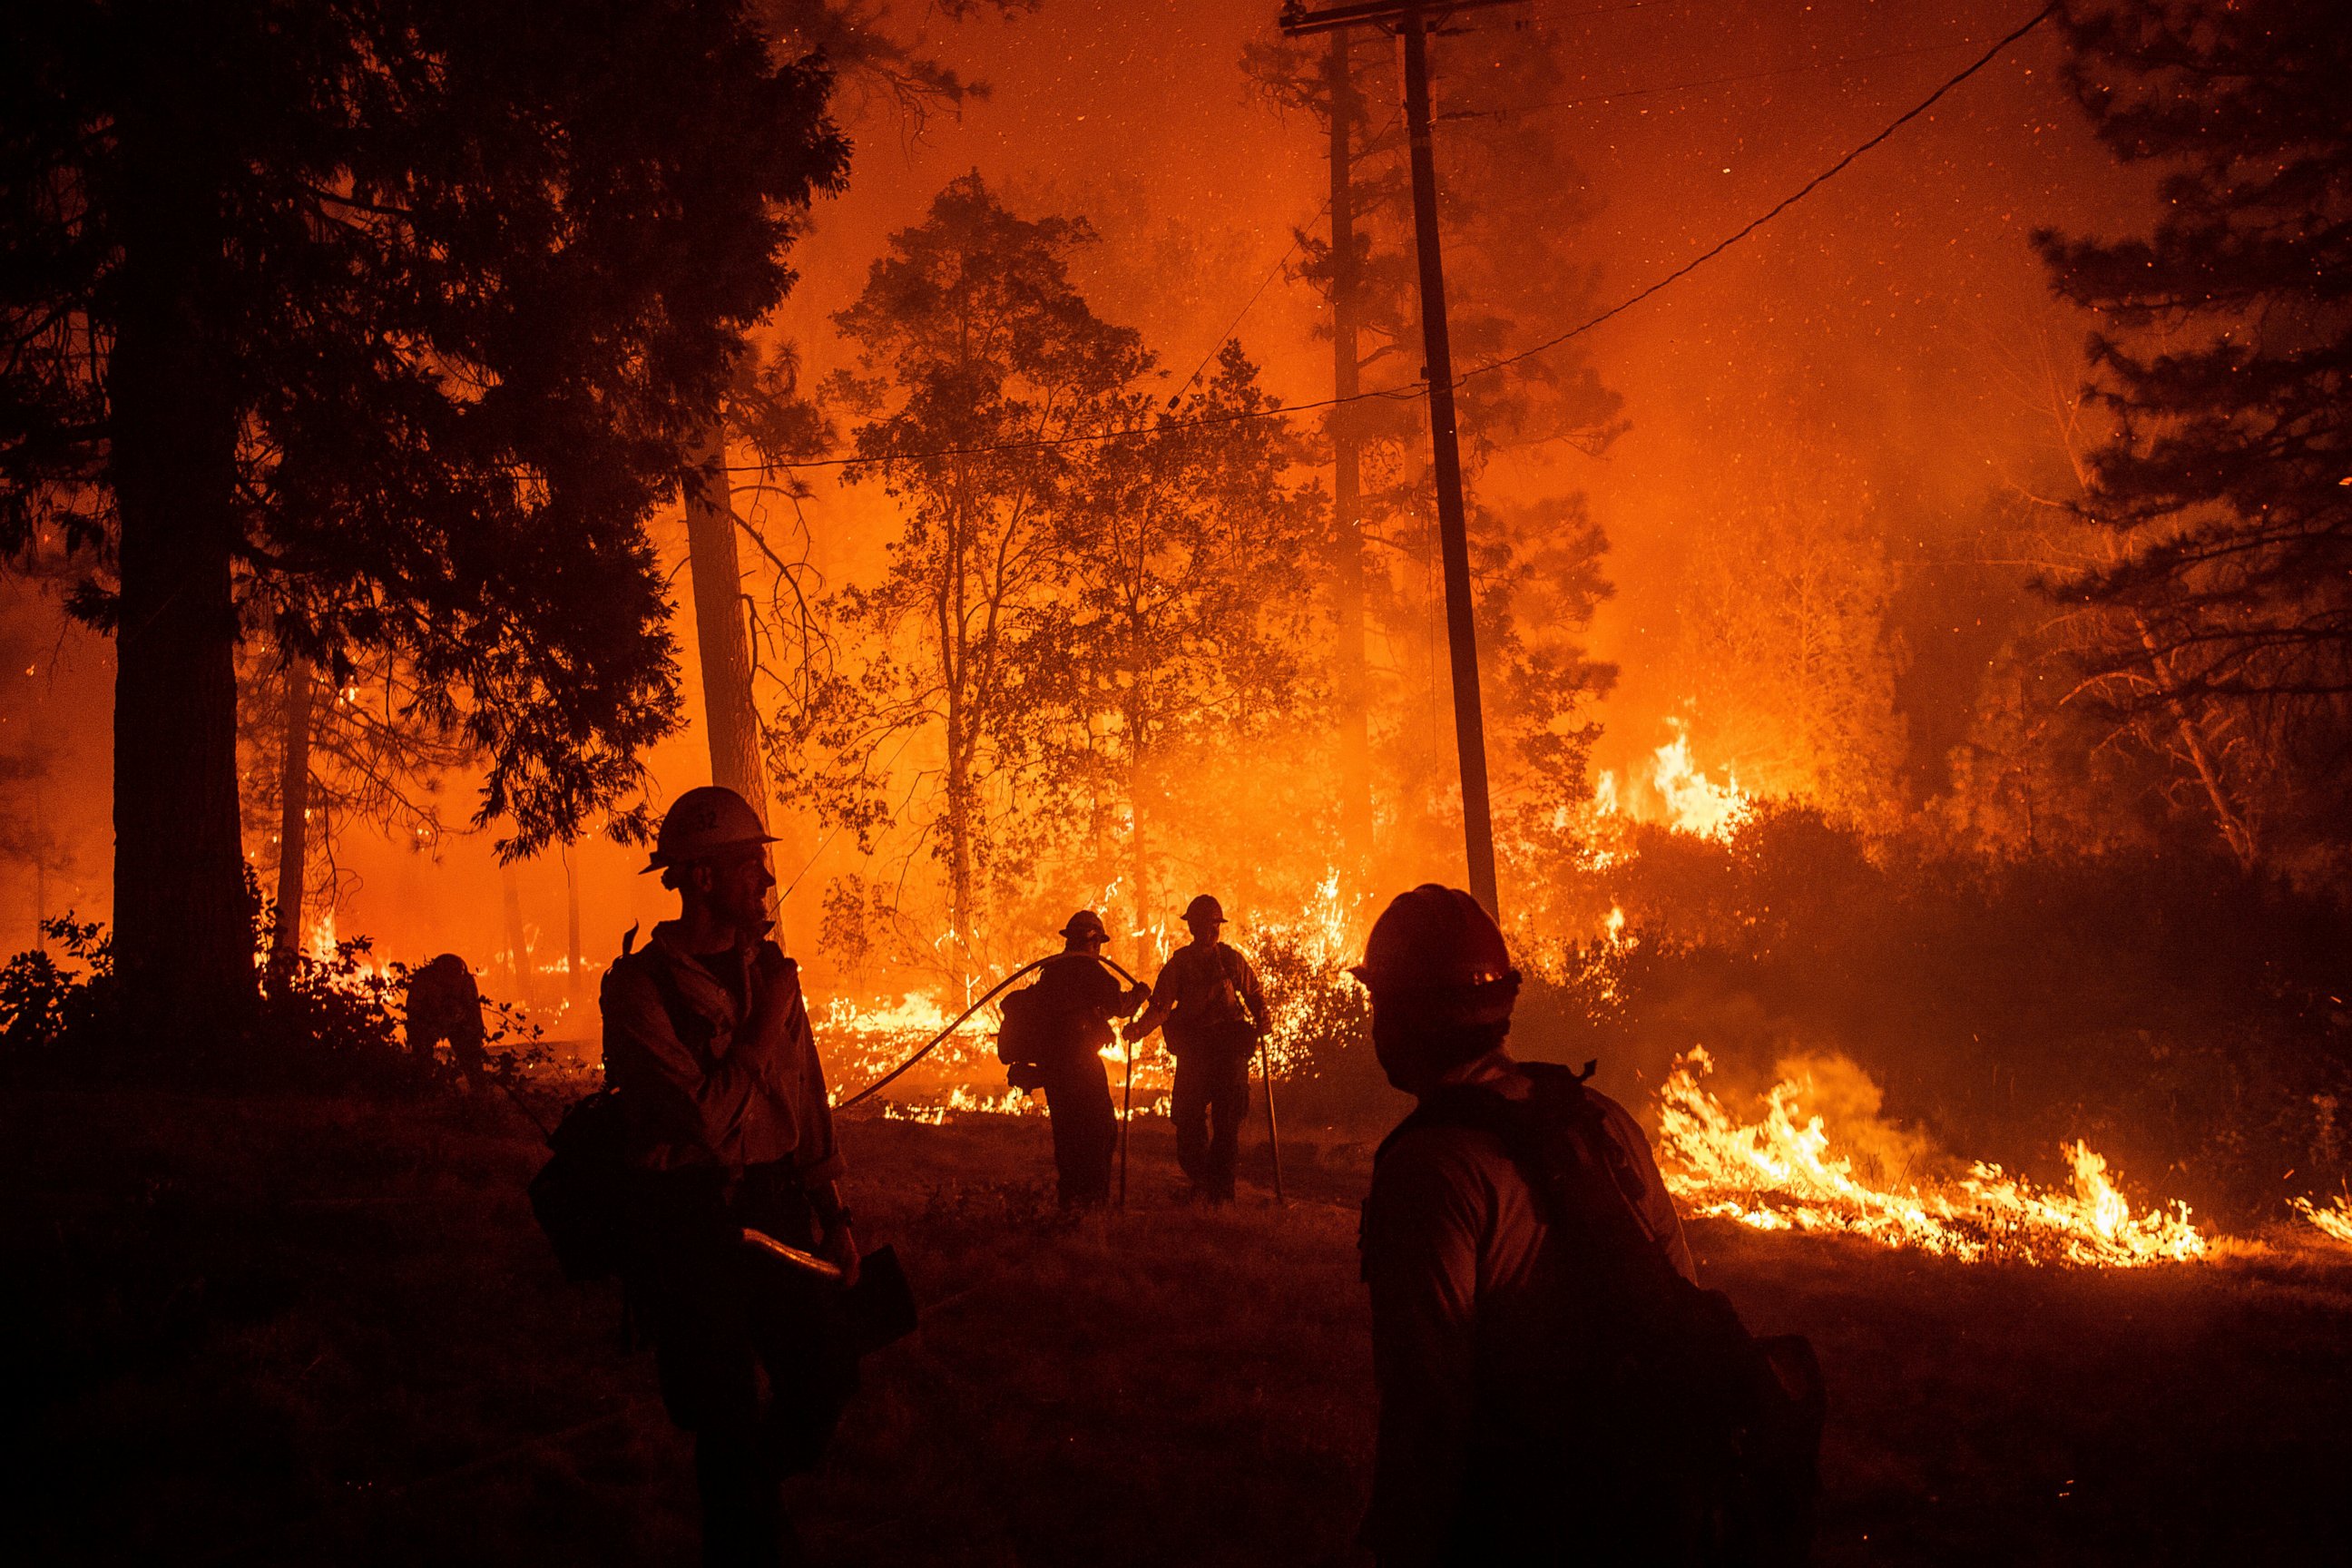 Firefighters monitor a backfire while battling the Delta Fire in the Shasta-Trinity National Forest, Calif., on Thursday, Sept. 6, 2018.